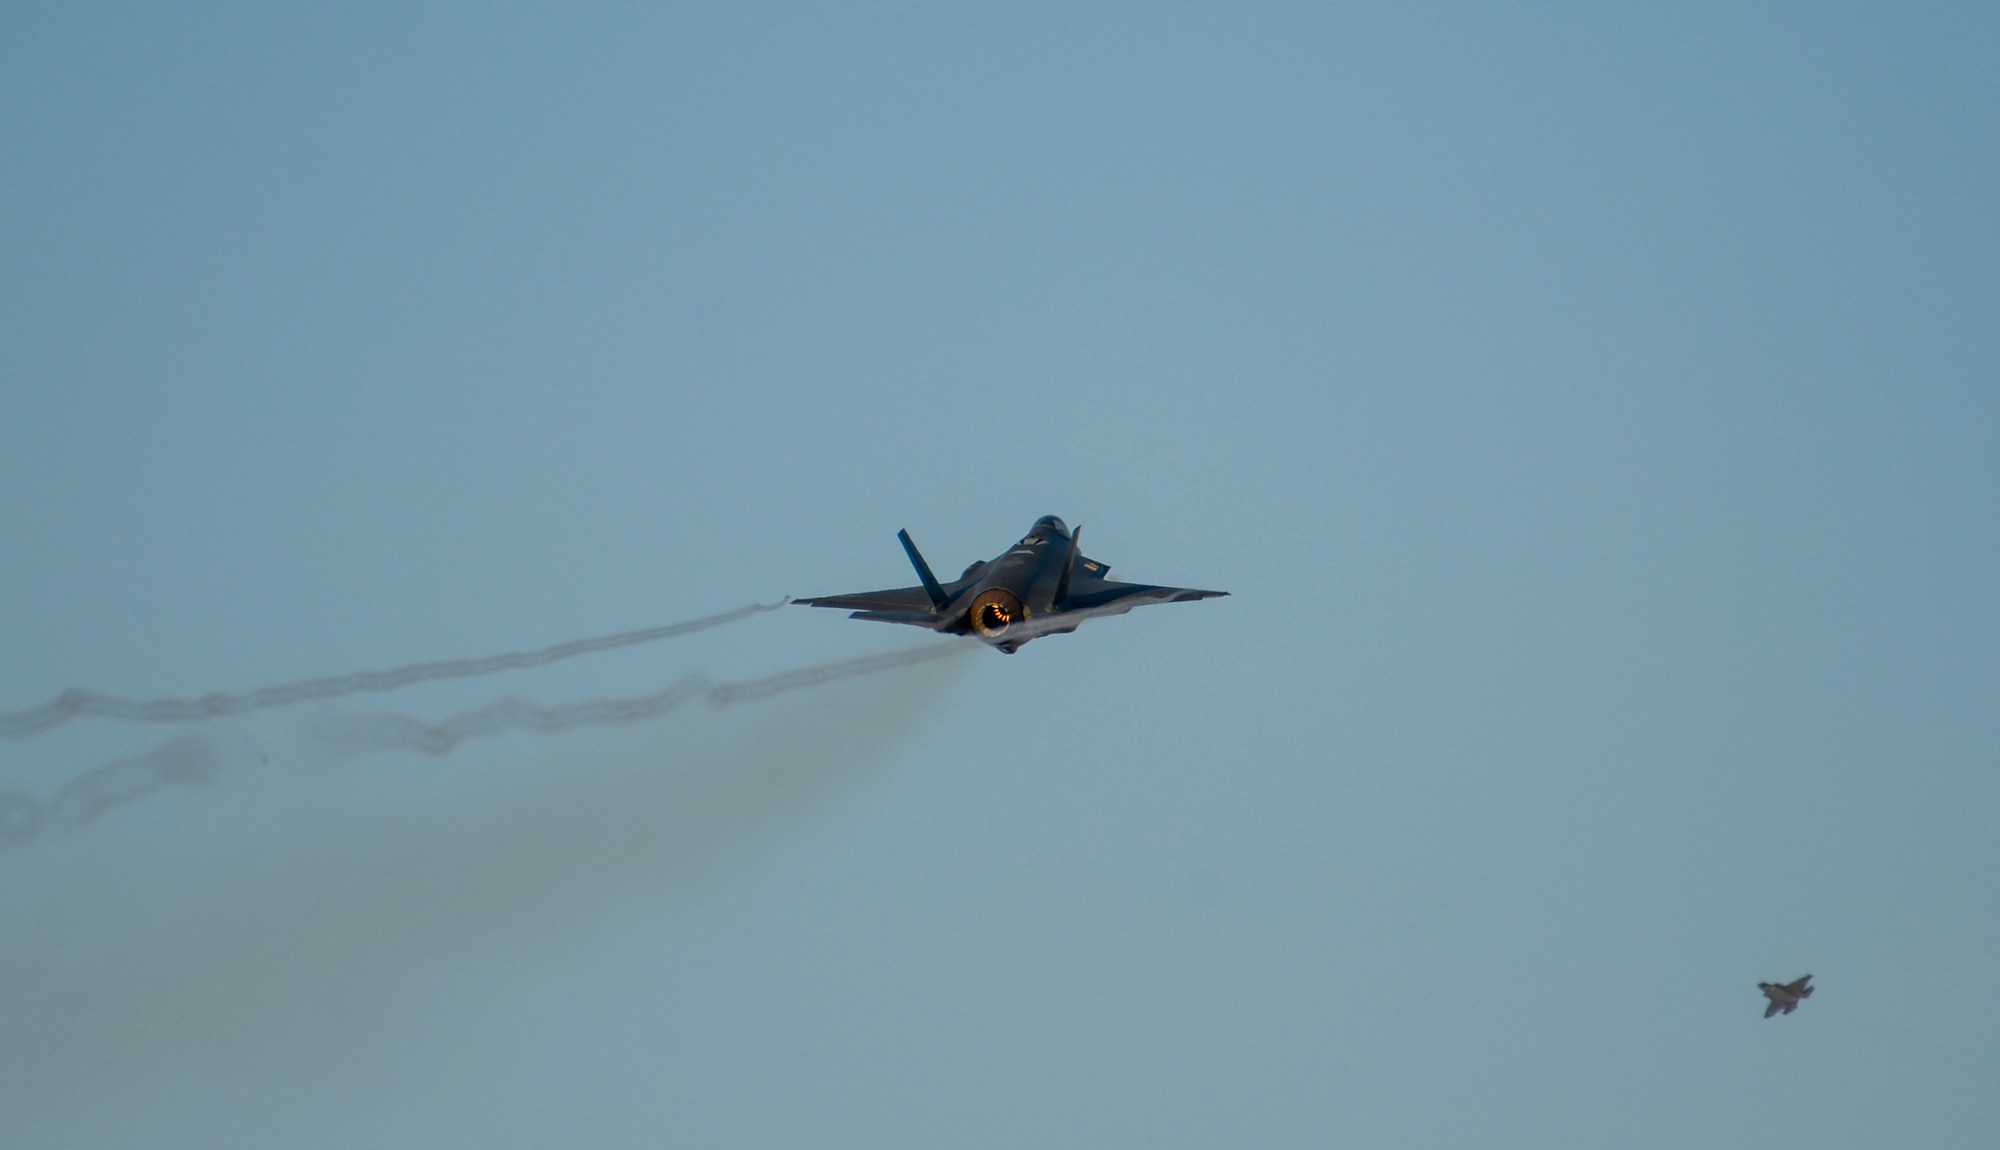 An F-35A Lightning II, assigned to the 356th Fighter Squadron, takes off during Arctic Gold 21-1 on Eielson Air Force Base, Alaska, Nov. 17, 2020. Twelve jets were launched consecutively demonstrating the 354th Fighter Wing’s ability to rapidly deploy fifth-generation assets. (U.S. Air Force photo by Senior Airman Beaux Hebert)